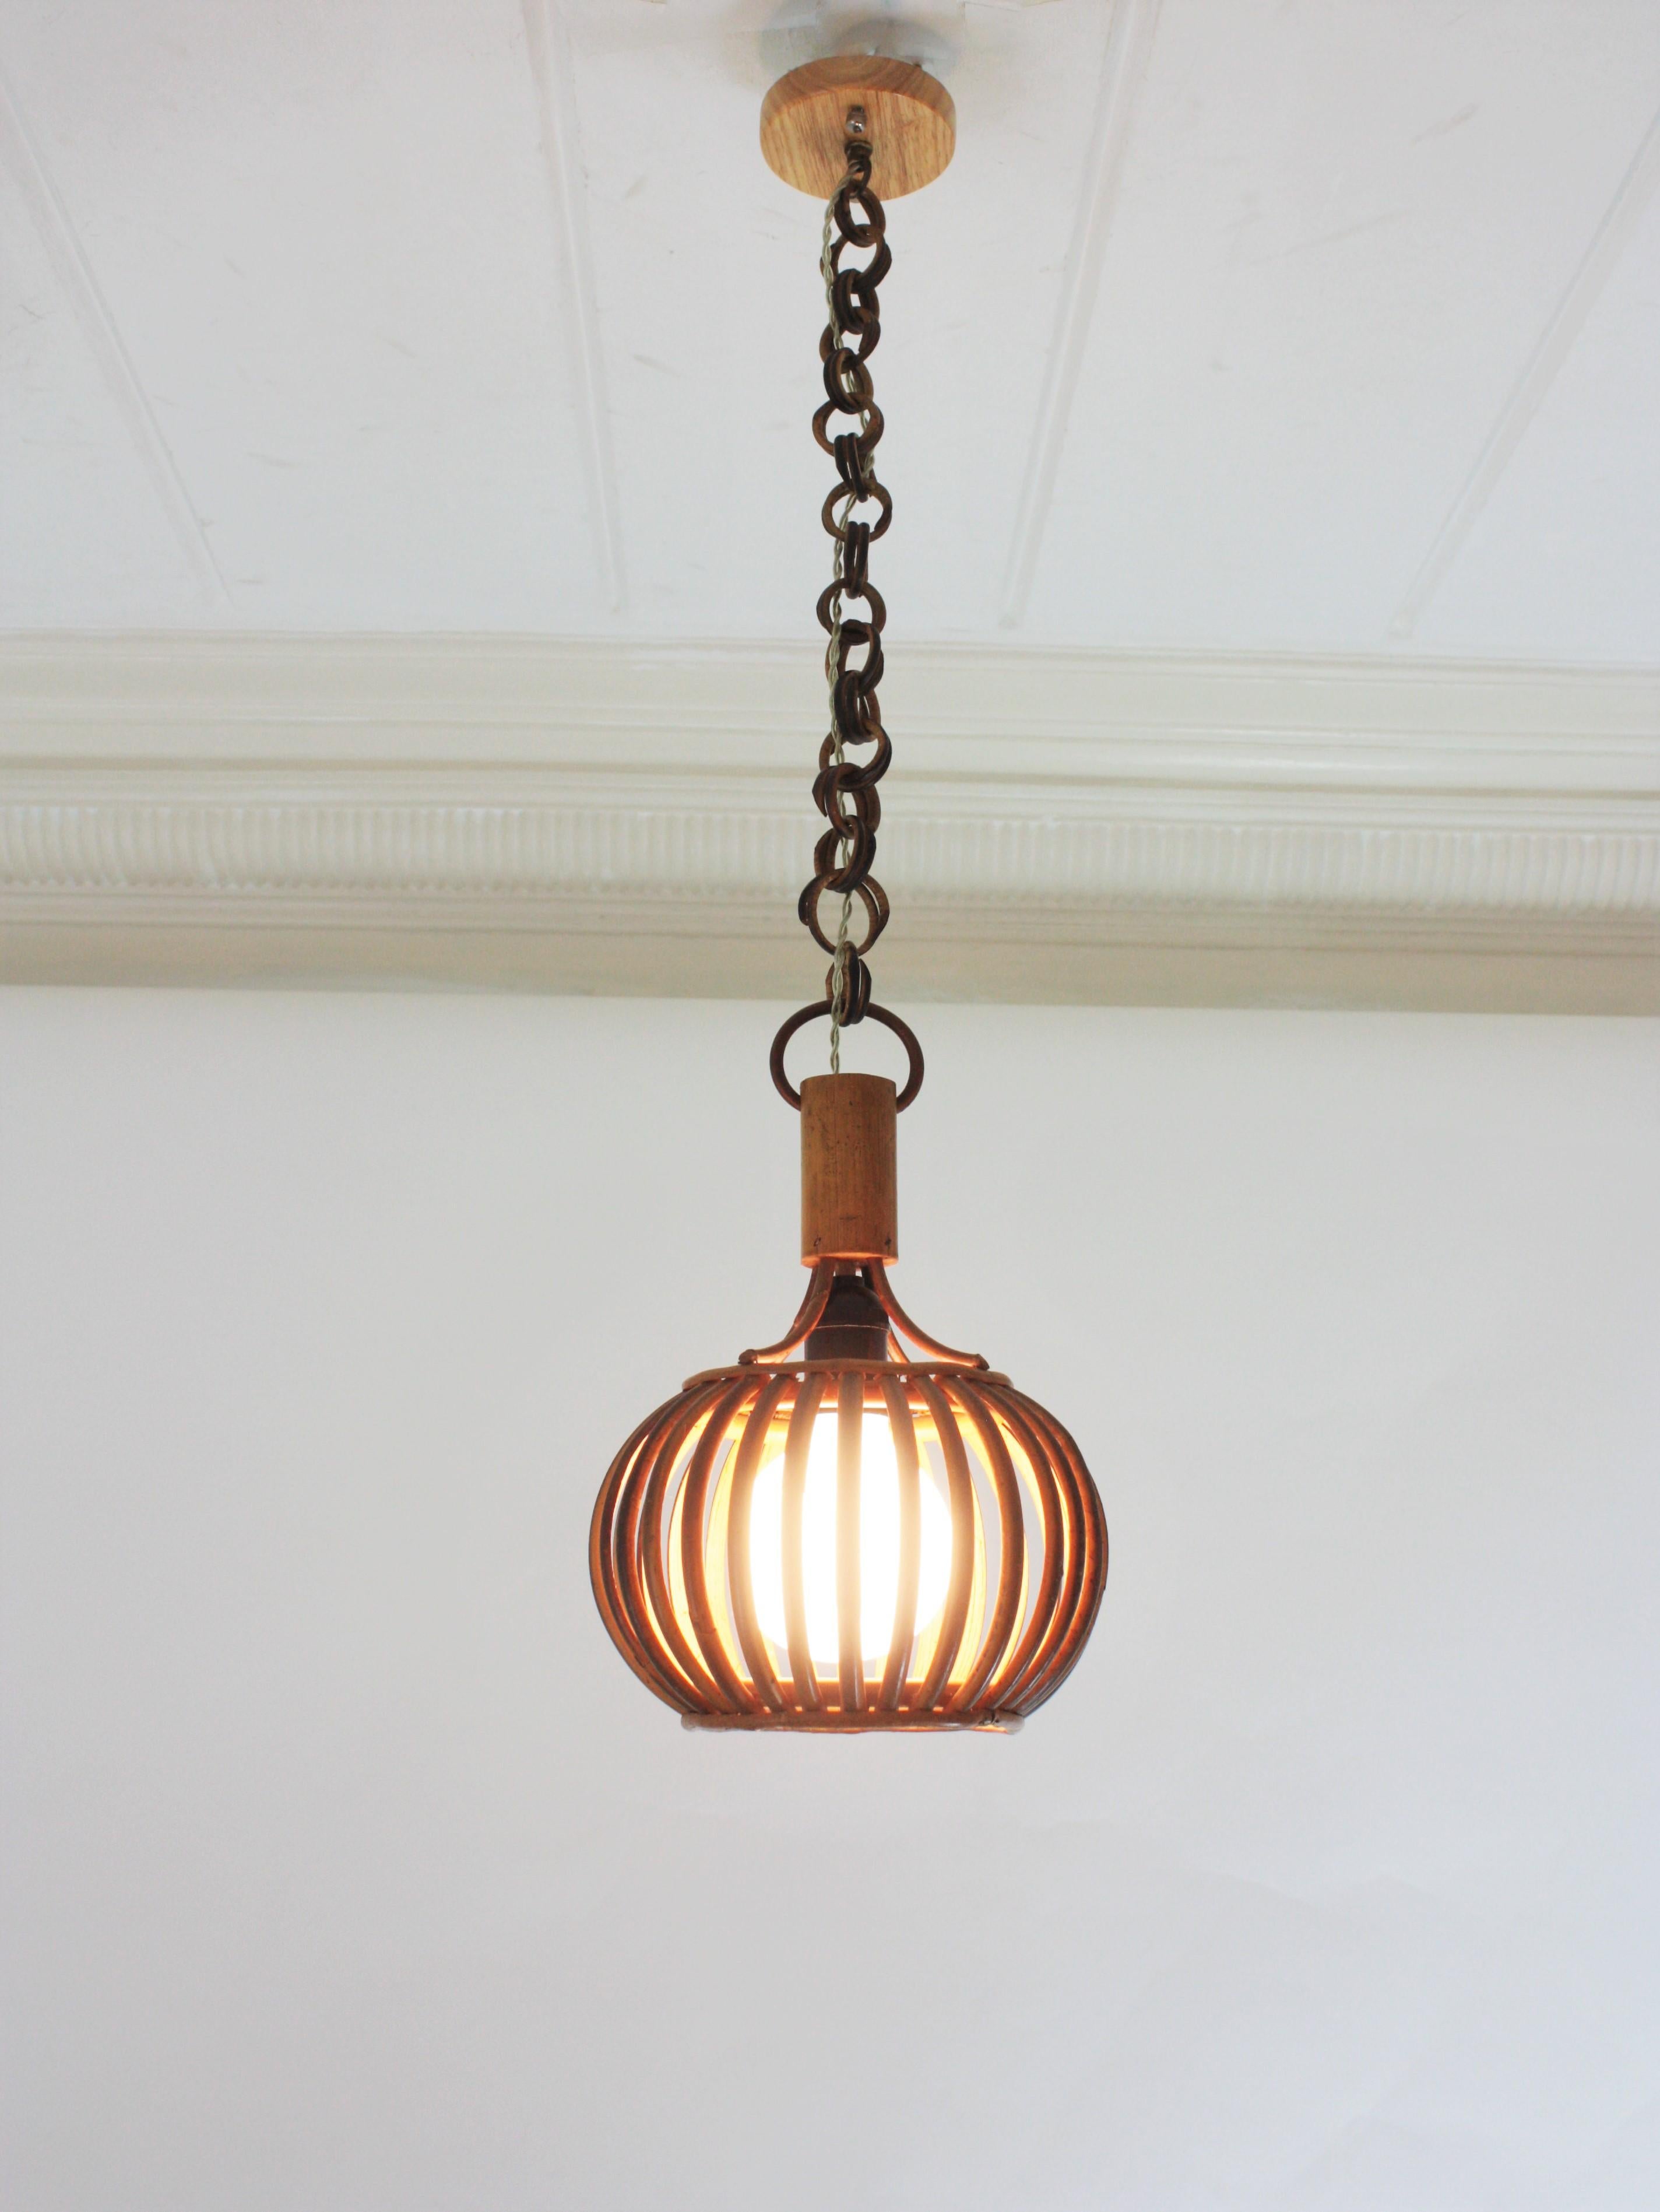 Hand-Crafted Louis Sognot Rattan Pendant Hanging Light / Lantern, 1950s For Sale